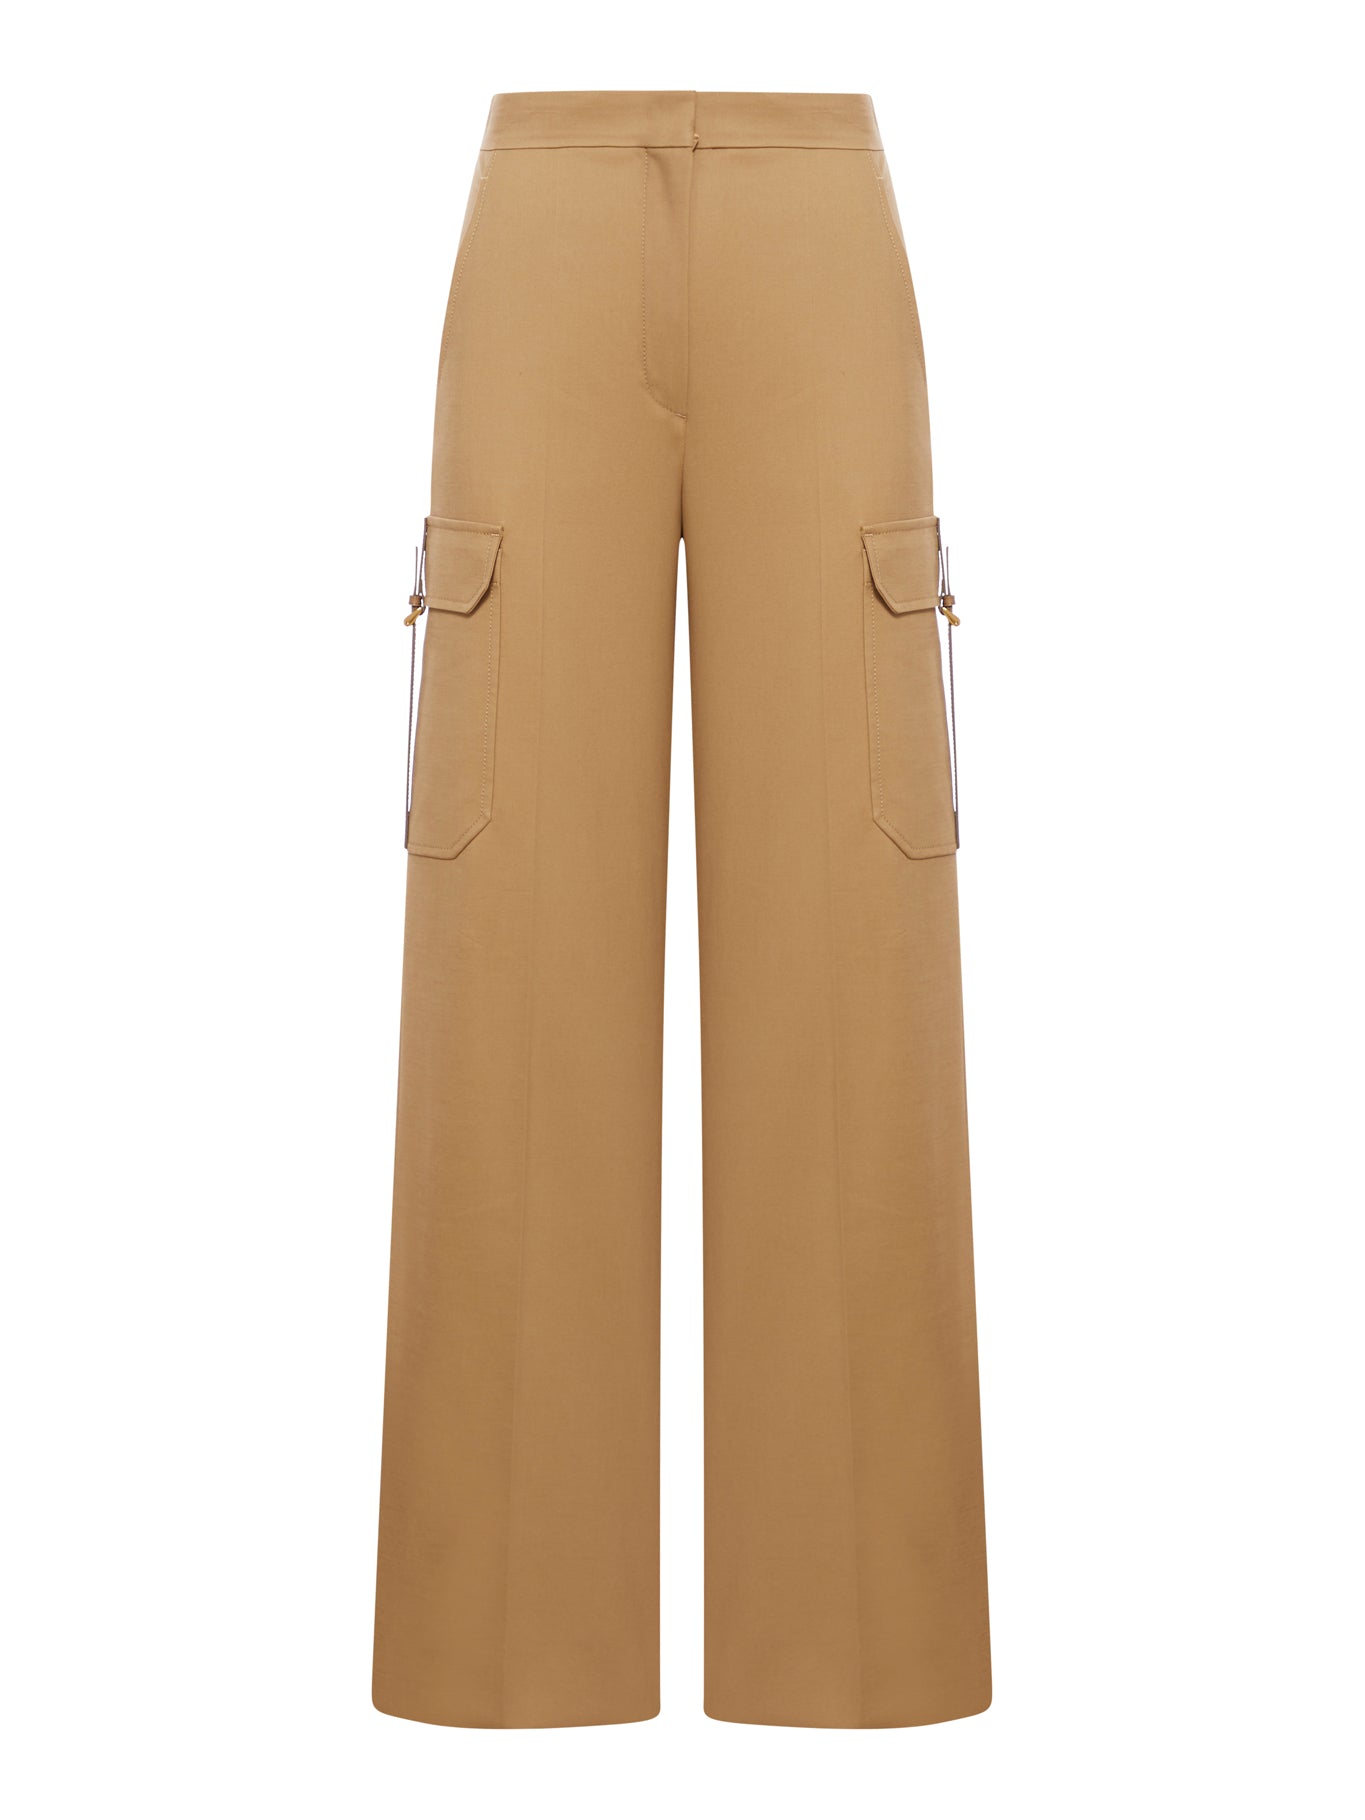 Wide trousers in stretch satin